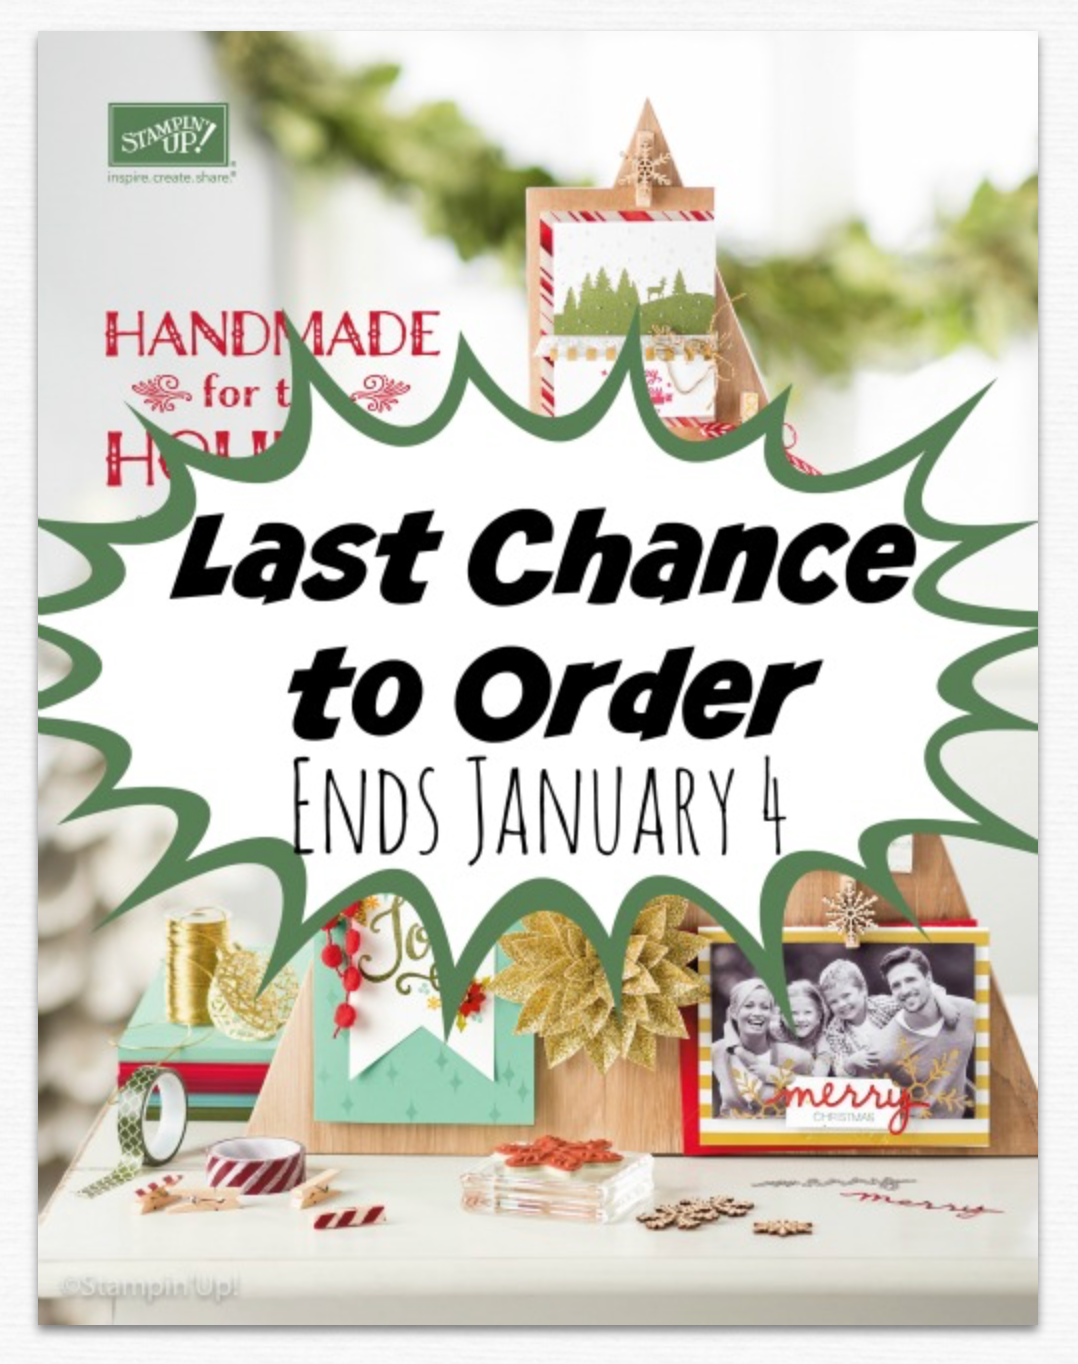 Last Chance to Order from the 2015 Stampin' Up! Holiday Catalogue